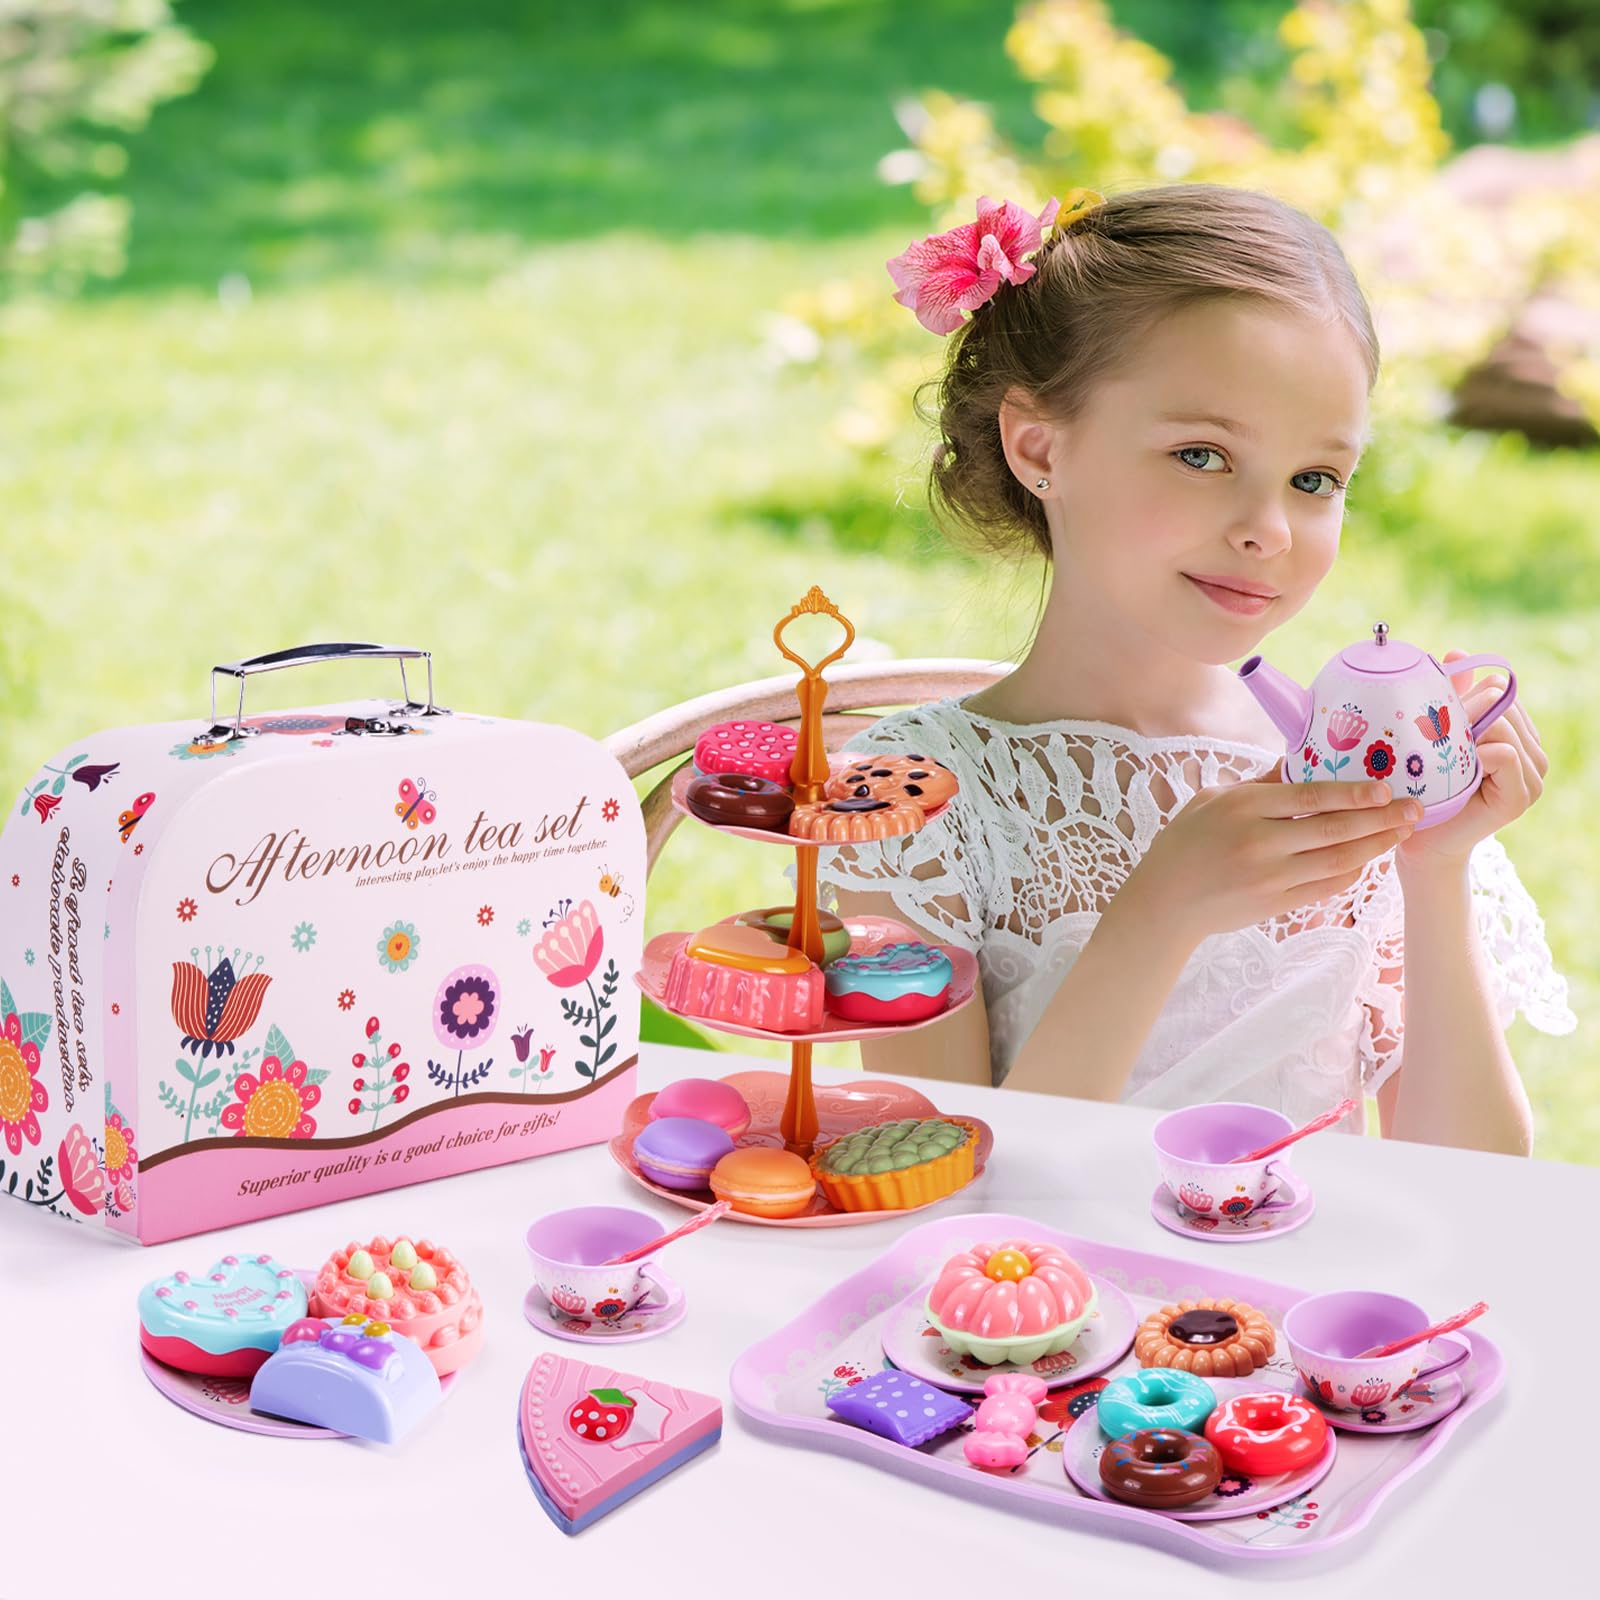 MAMPO 46PCS Tea Set for Little Girls, Princess Tea Time Pretend Kitchen Toy with Biscuits, Teapot, Cake, Dessert, Carrying Case, Donut for Kids Girls Boys